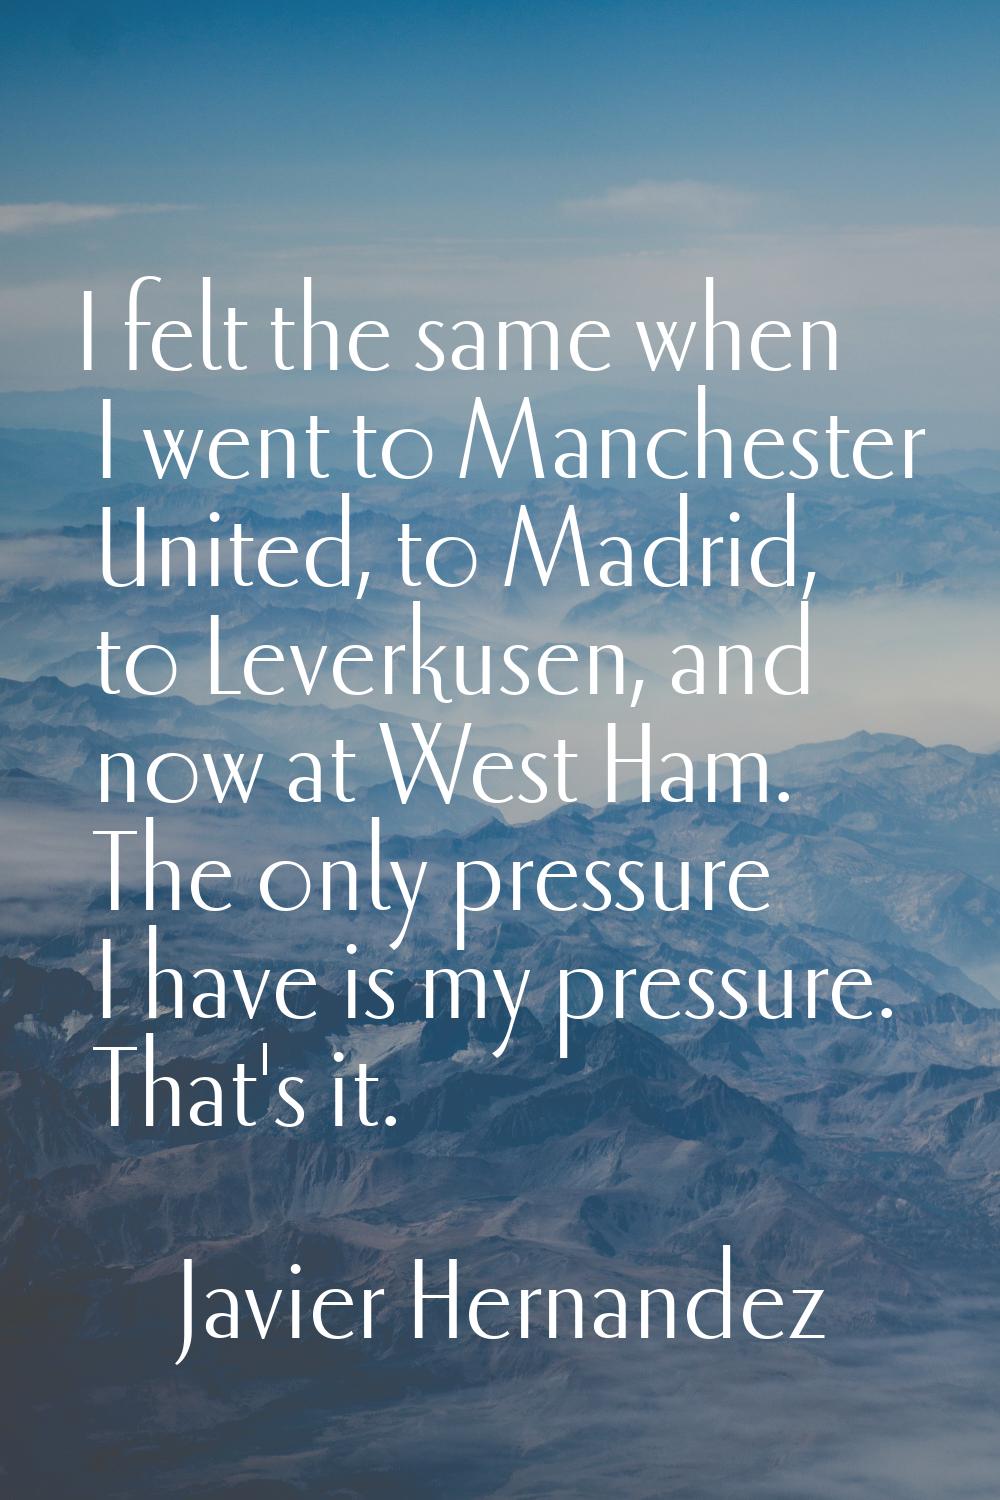 I felt the same when I went to Manchester United, to Madrid, to Leverkusen, and now at West Ham. Th